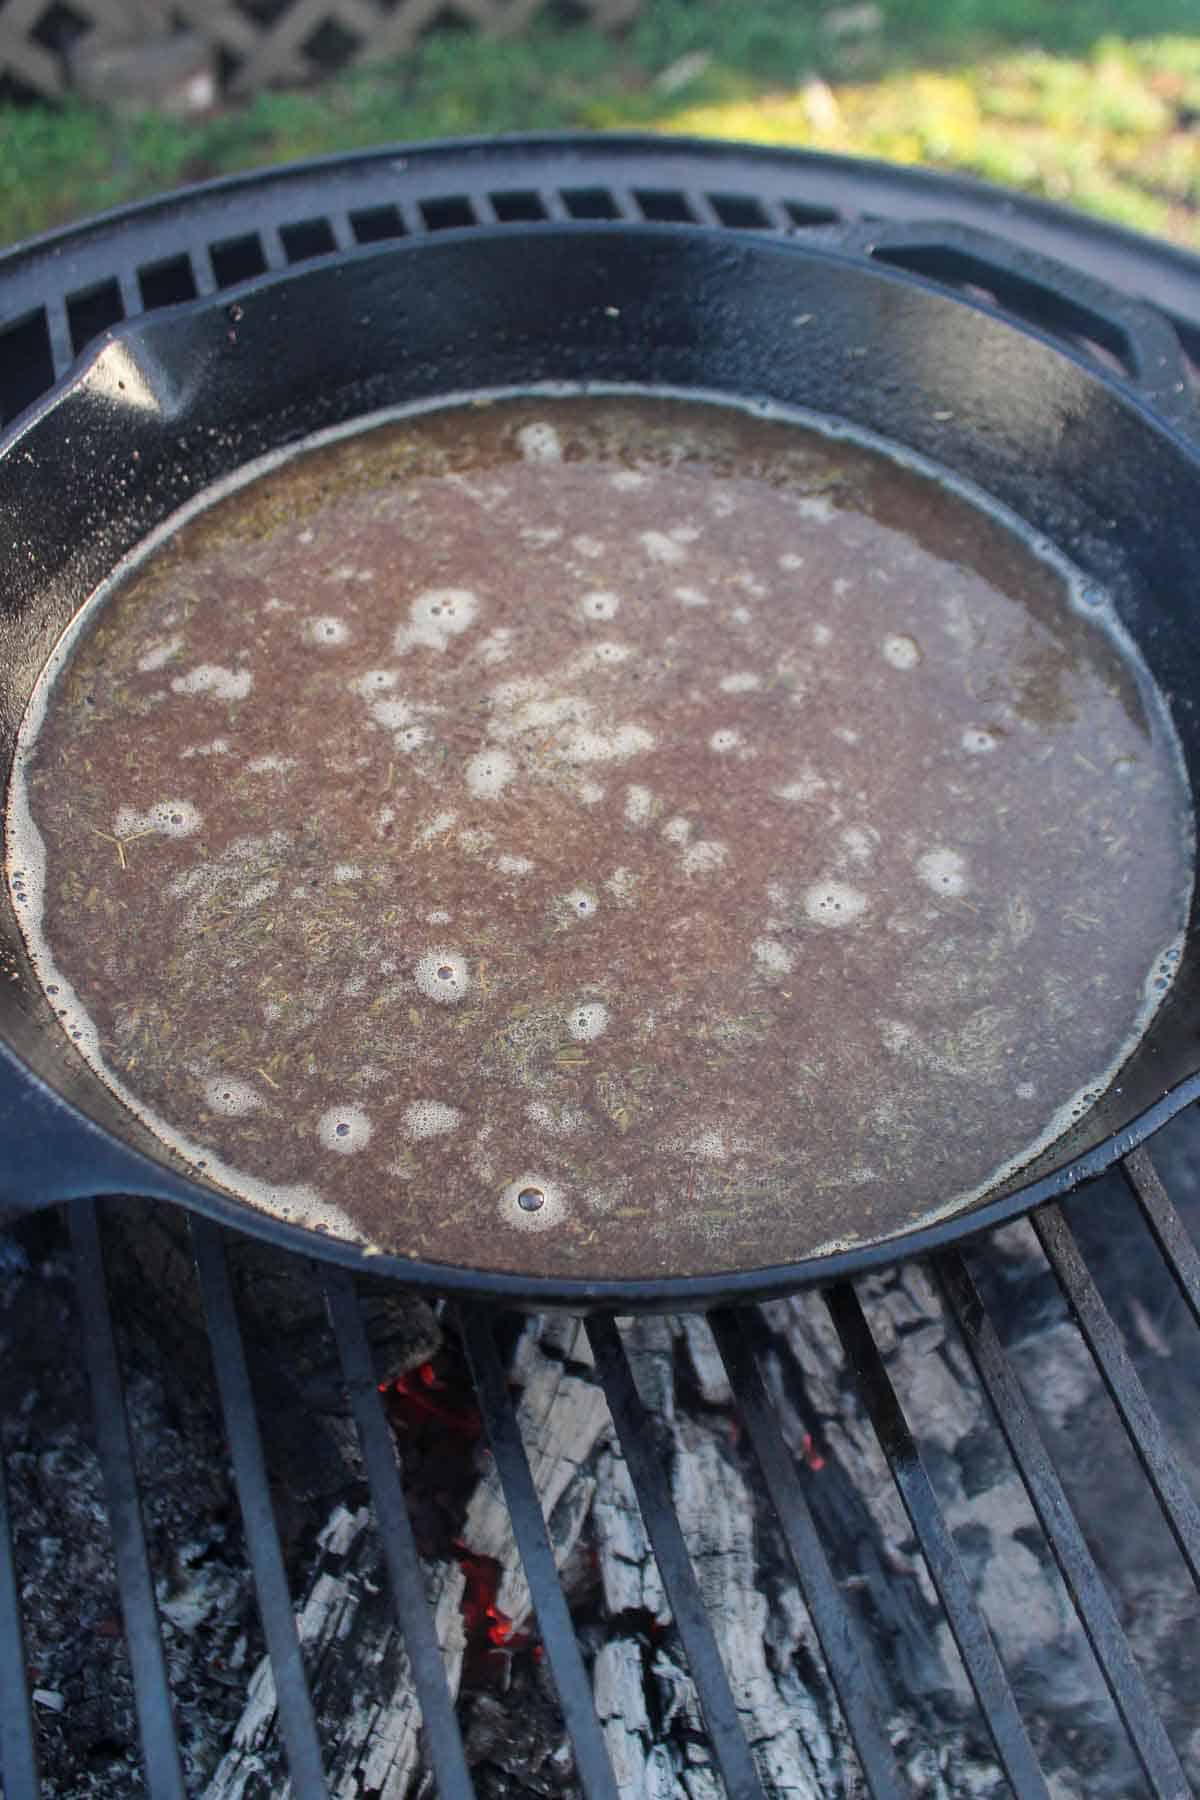 The Au Jus as it simmers over the fire.